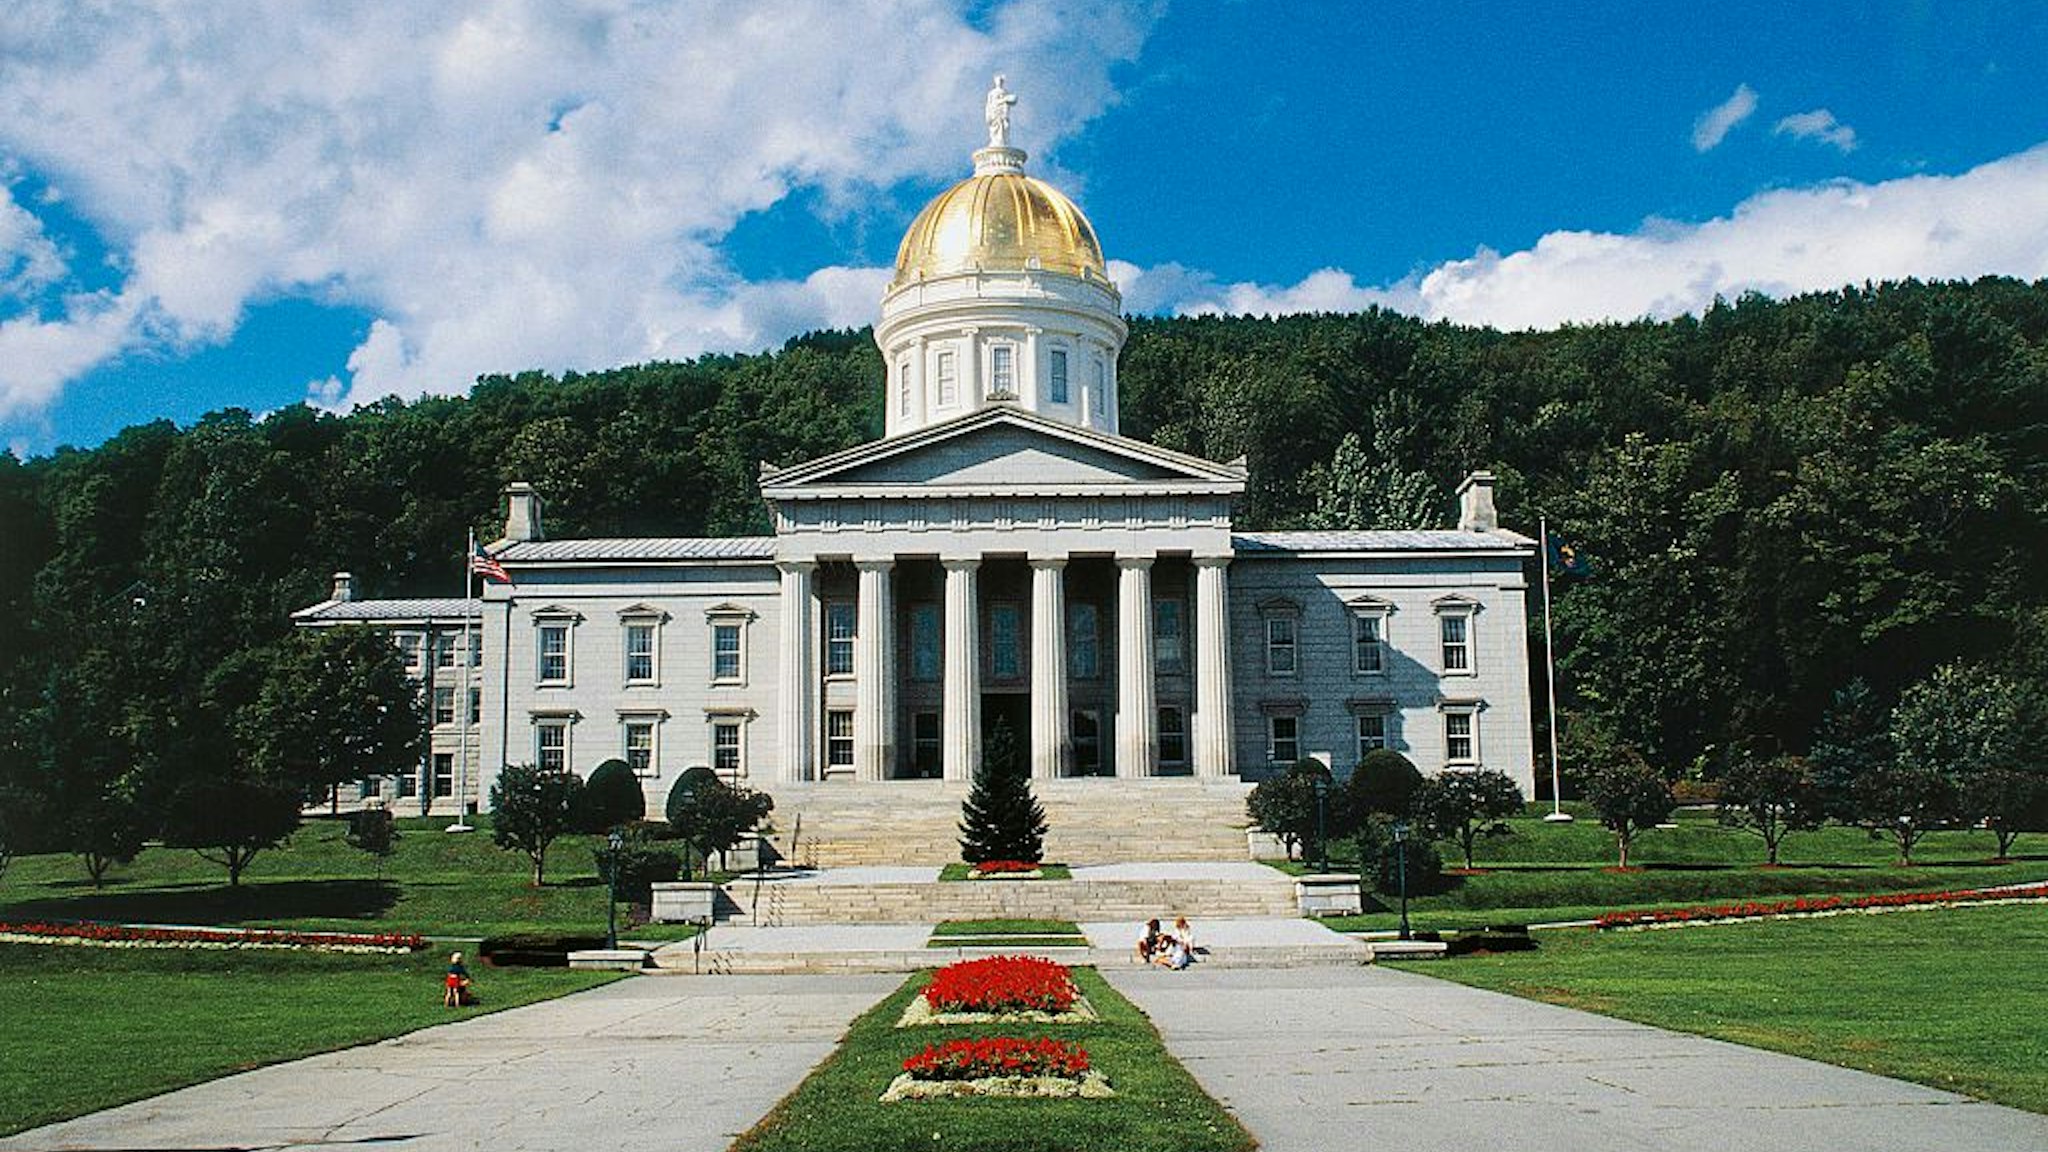 UNITED STATES - APRIL 23: Vermont State House, 1857-1858, by Thomas Silloway, Montpelier, Vermont, United States of America. (Photo by DeAgostini/Getty Images)